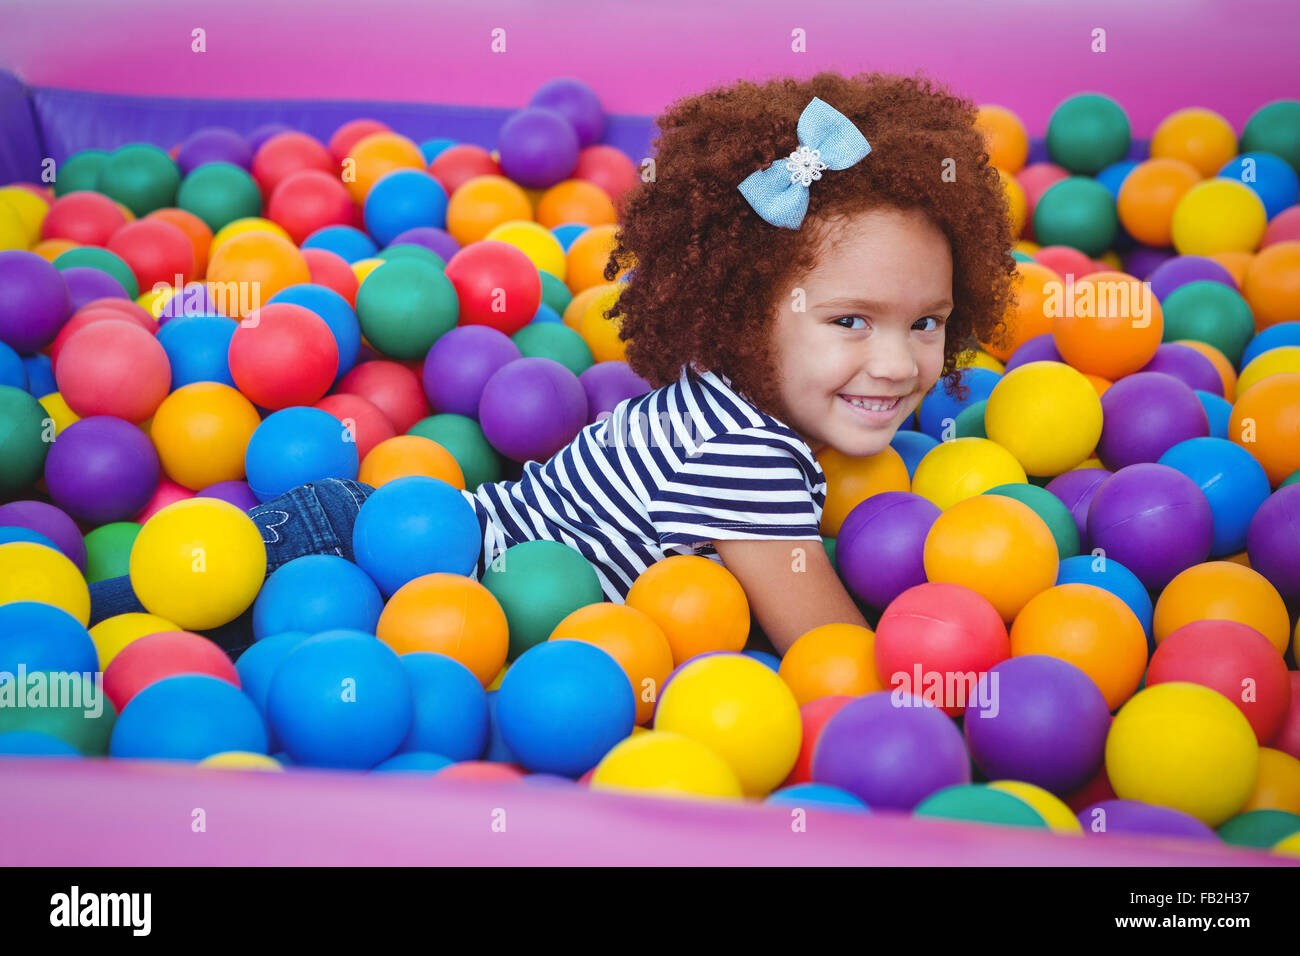 Cute smiling girl in sponge ball pool Banque D'Images